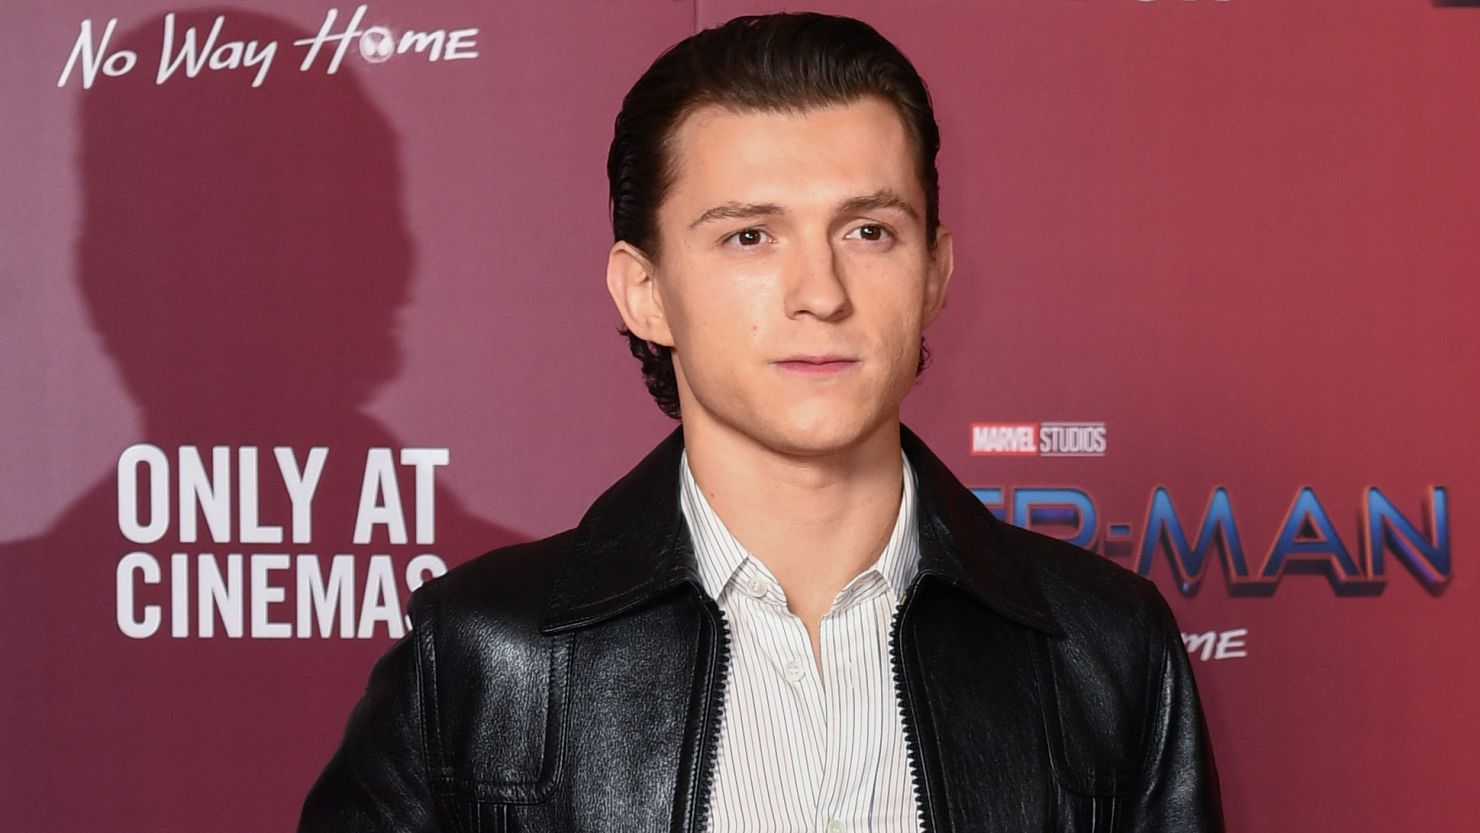 Spider-Man' Actor Tom Holland Reveals Hints About His Upcoming